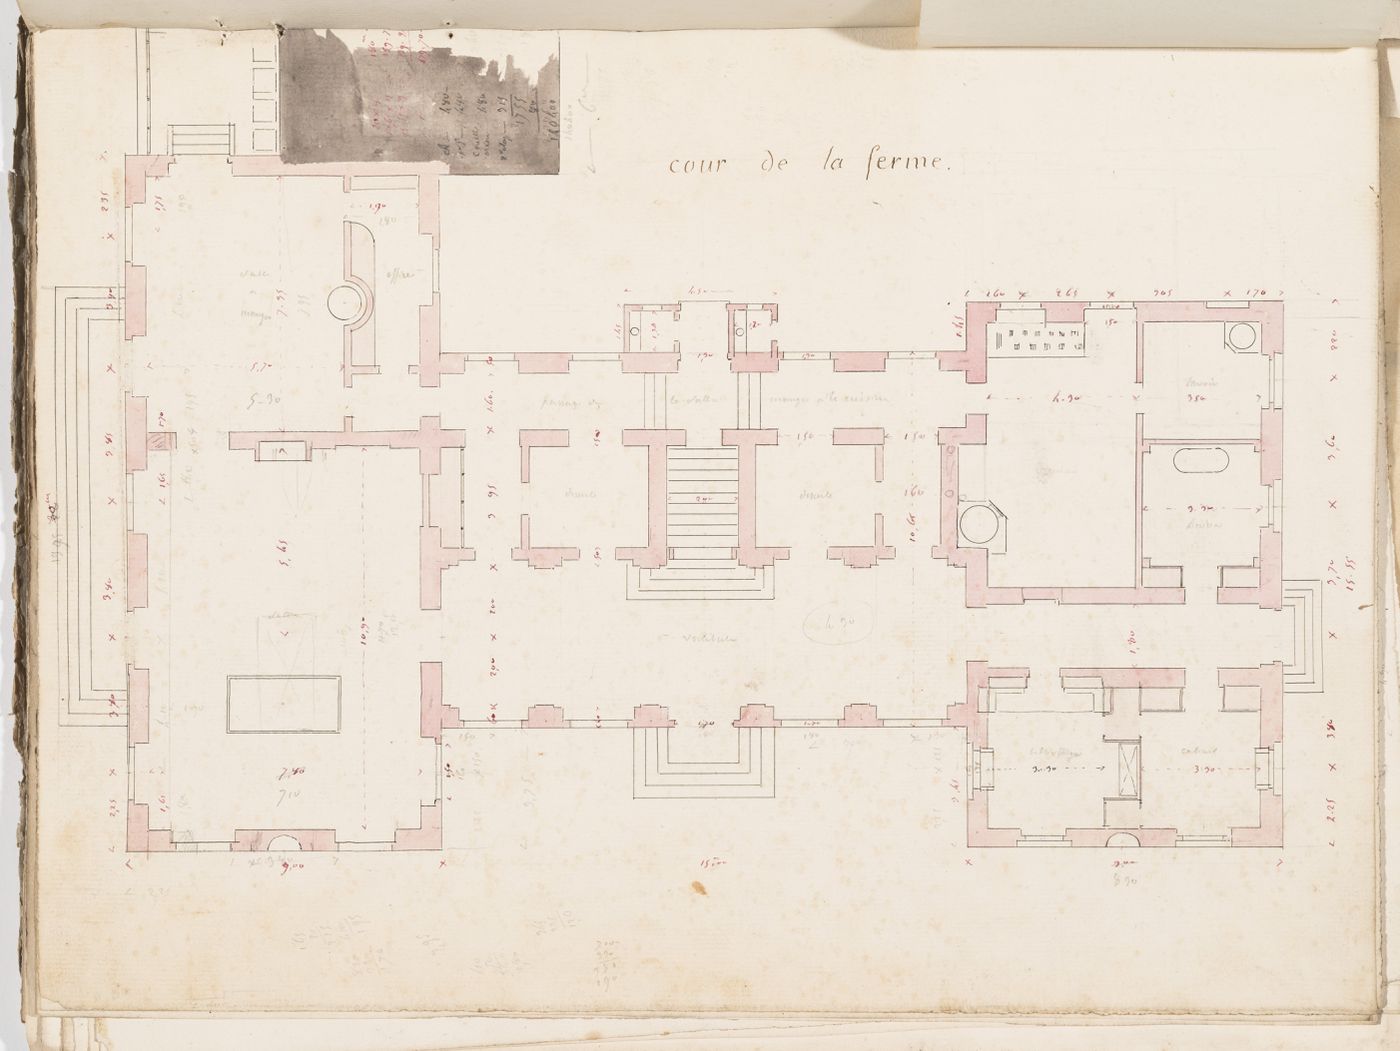 Project no. 7 for a country house for comte Treilhard: Partial ground floor plan; verso: Project no. 7 for a country house for comte Treilhard: Ground floor plan